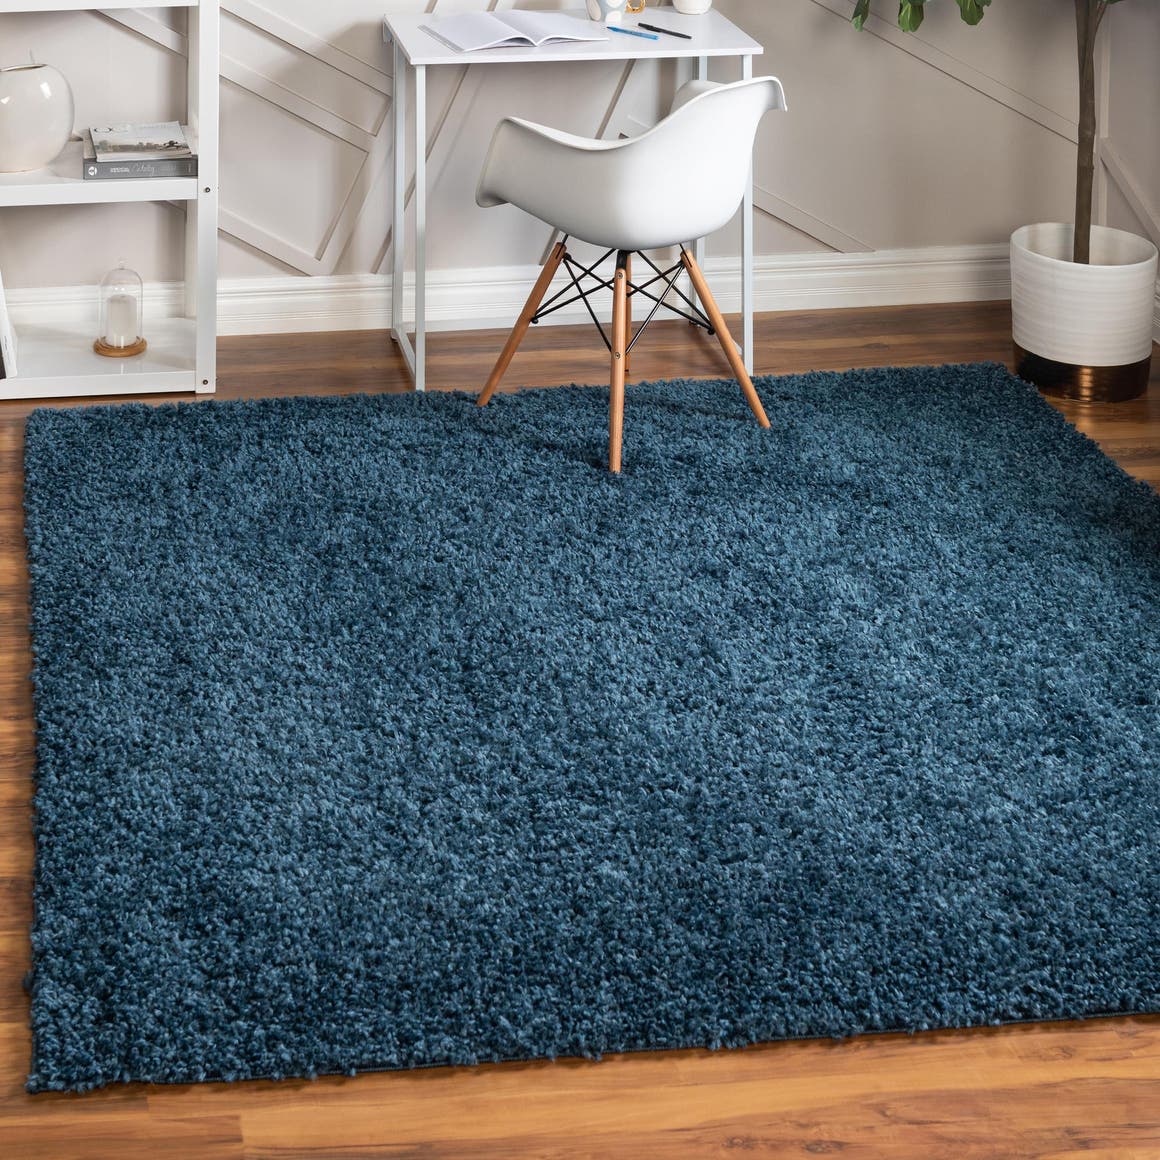 Unique Loom Davos Shag Rug Marine Blue 10' Square Solid Comfort Perfect For Dining Room Living Room Bed Room Kids Room - image 1 of 8